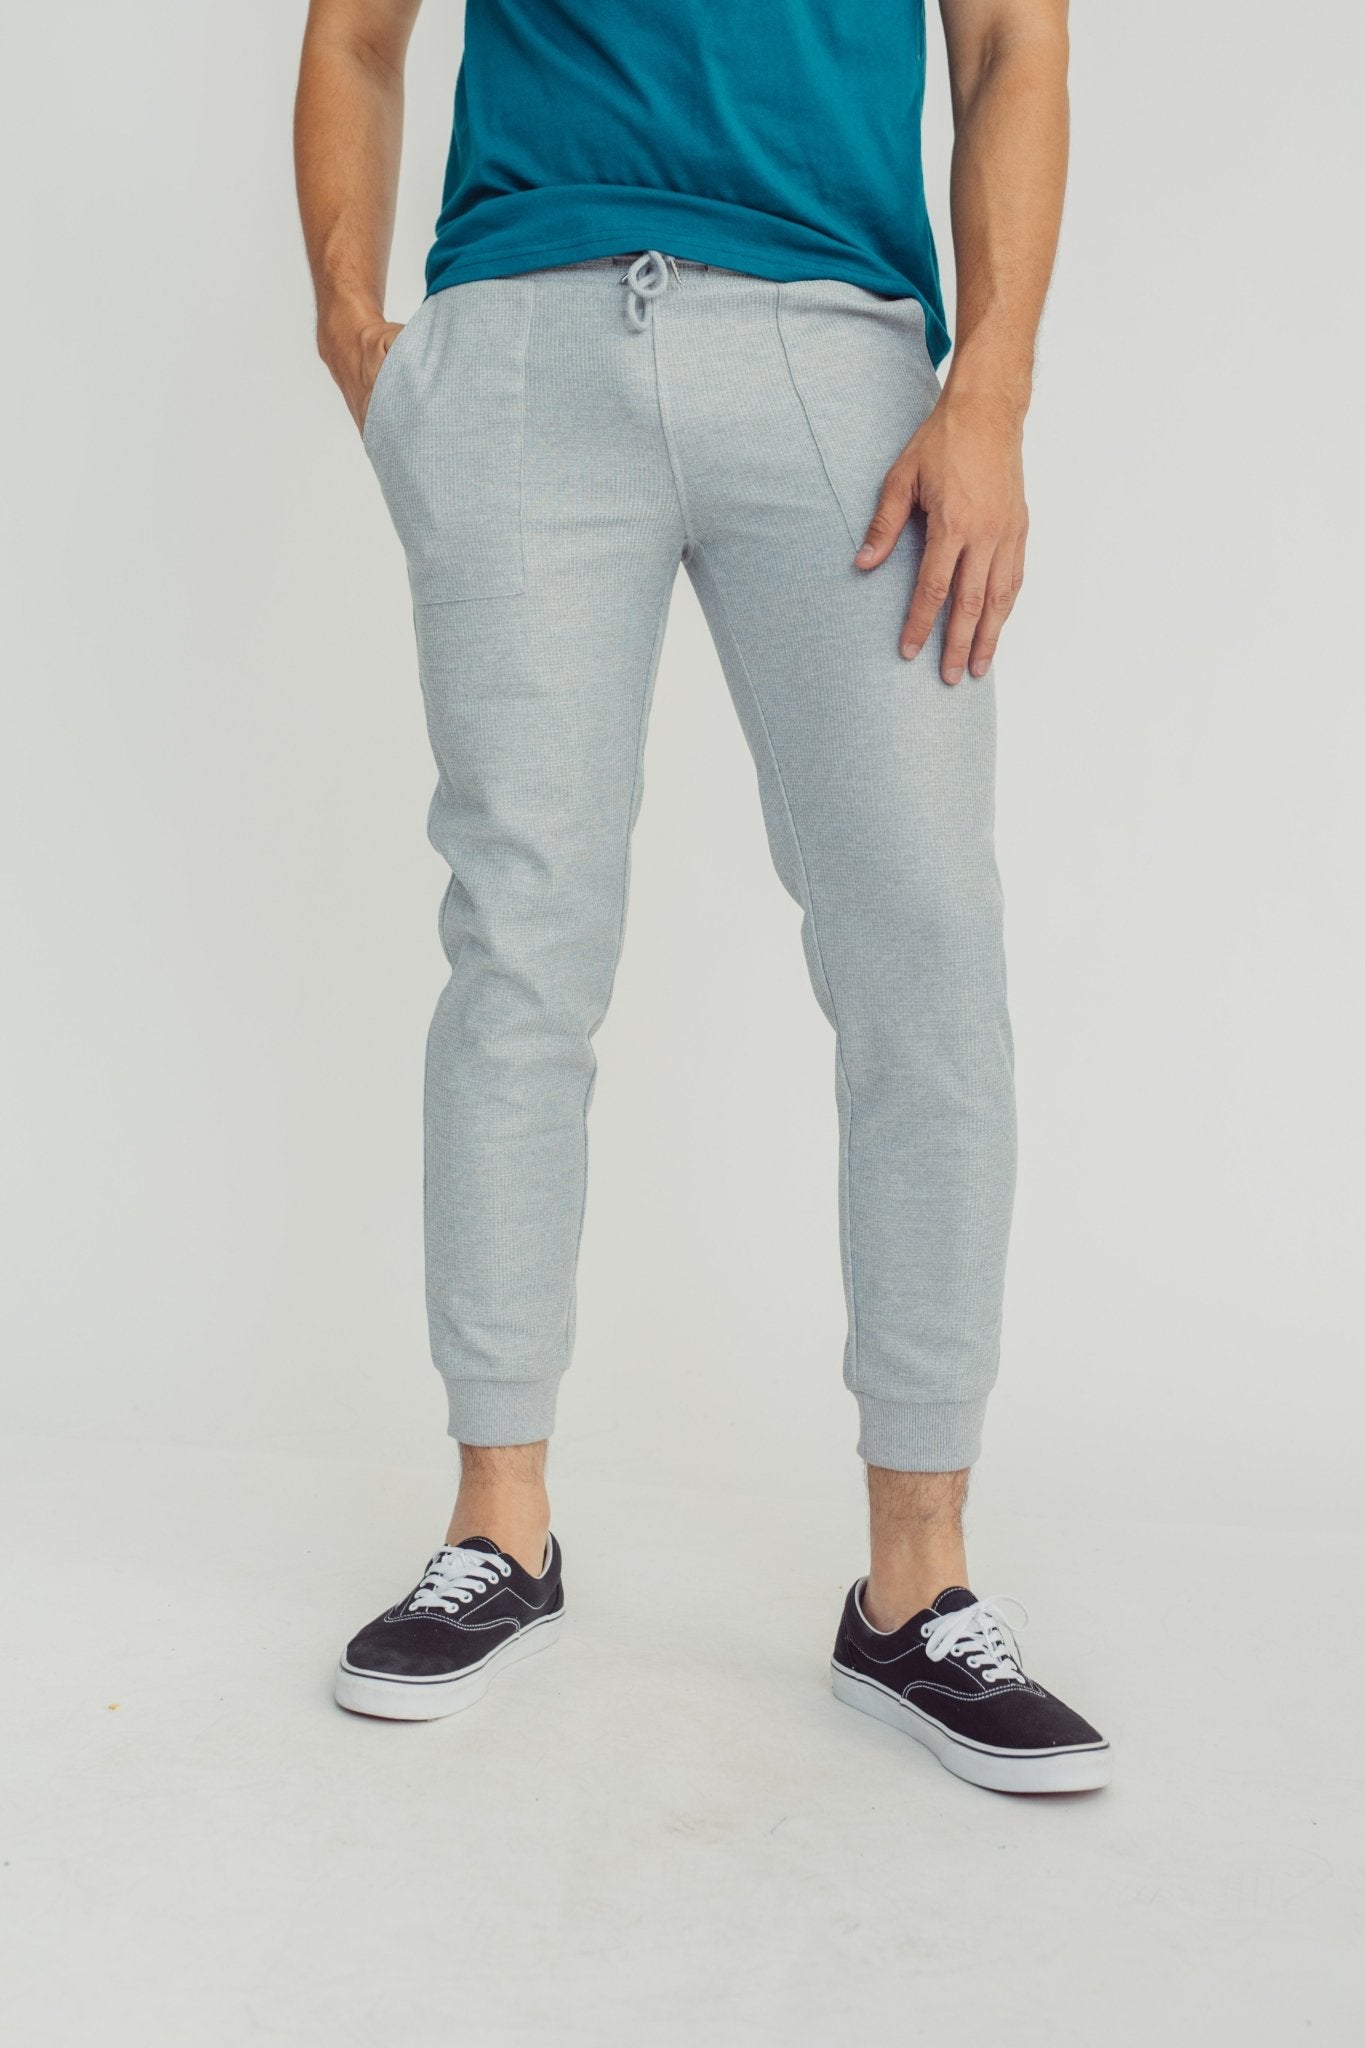 Heather Gray Jogger Pants with Large Pocket - Mossimo PH